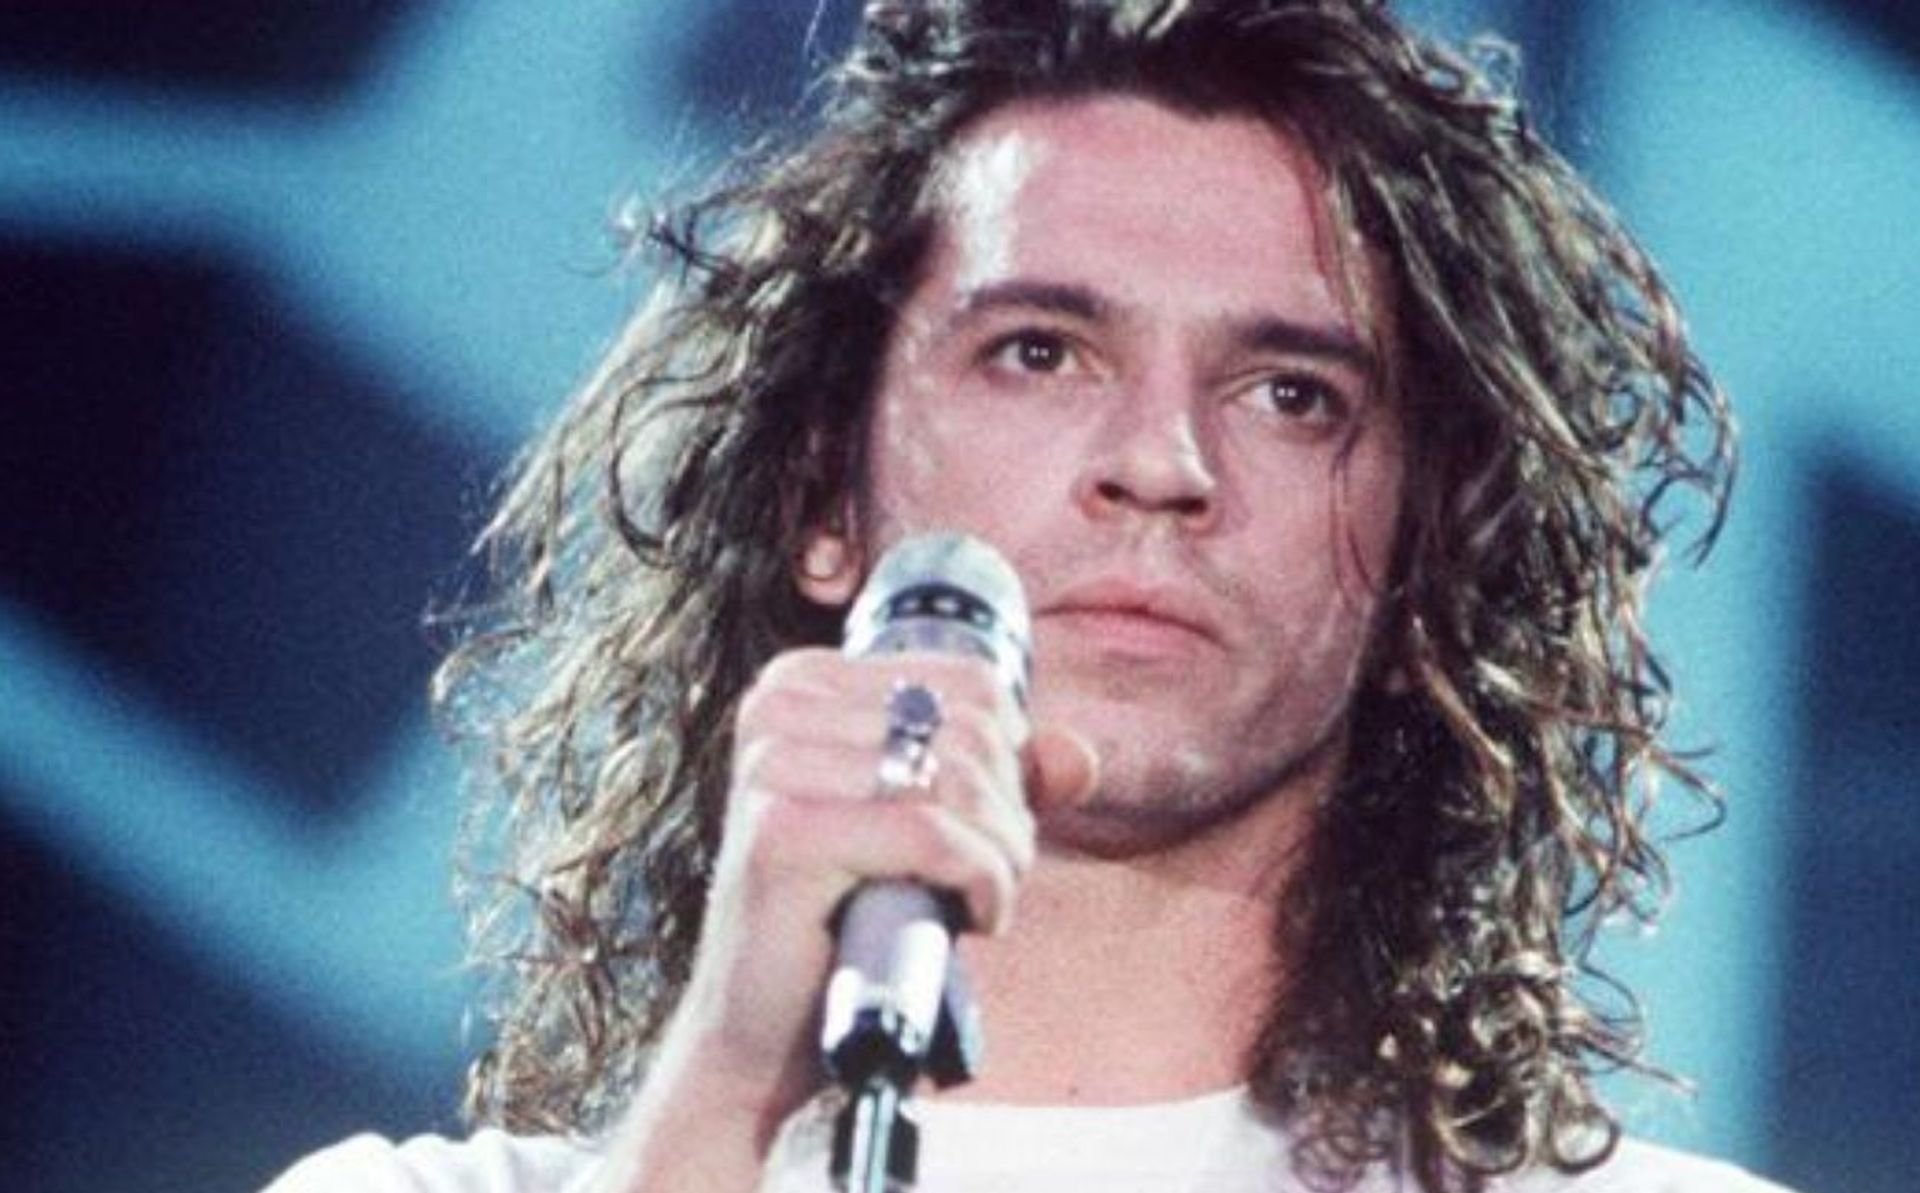 Precious Heart Remembering Michael Hutchence, 20 years after his death